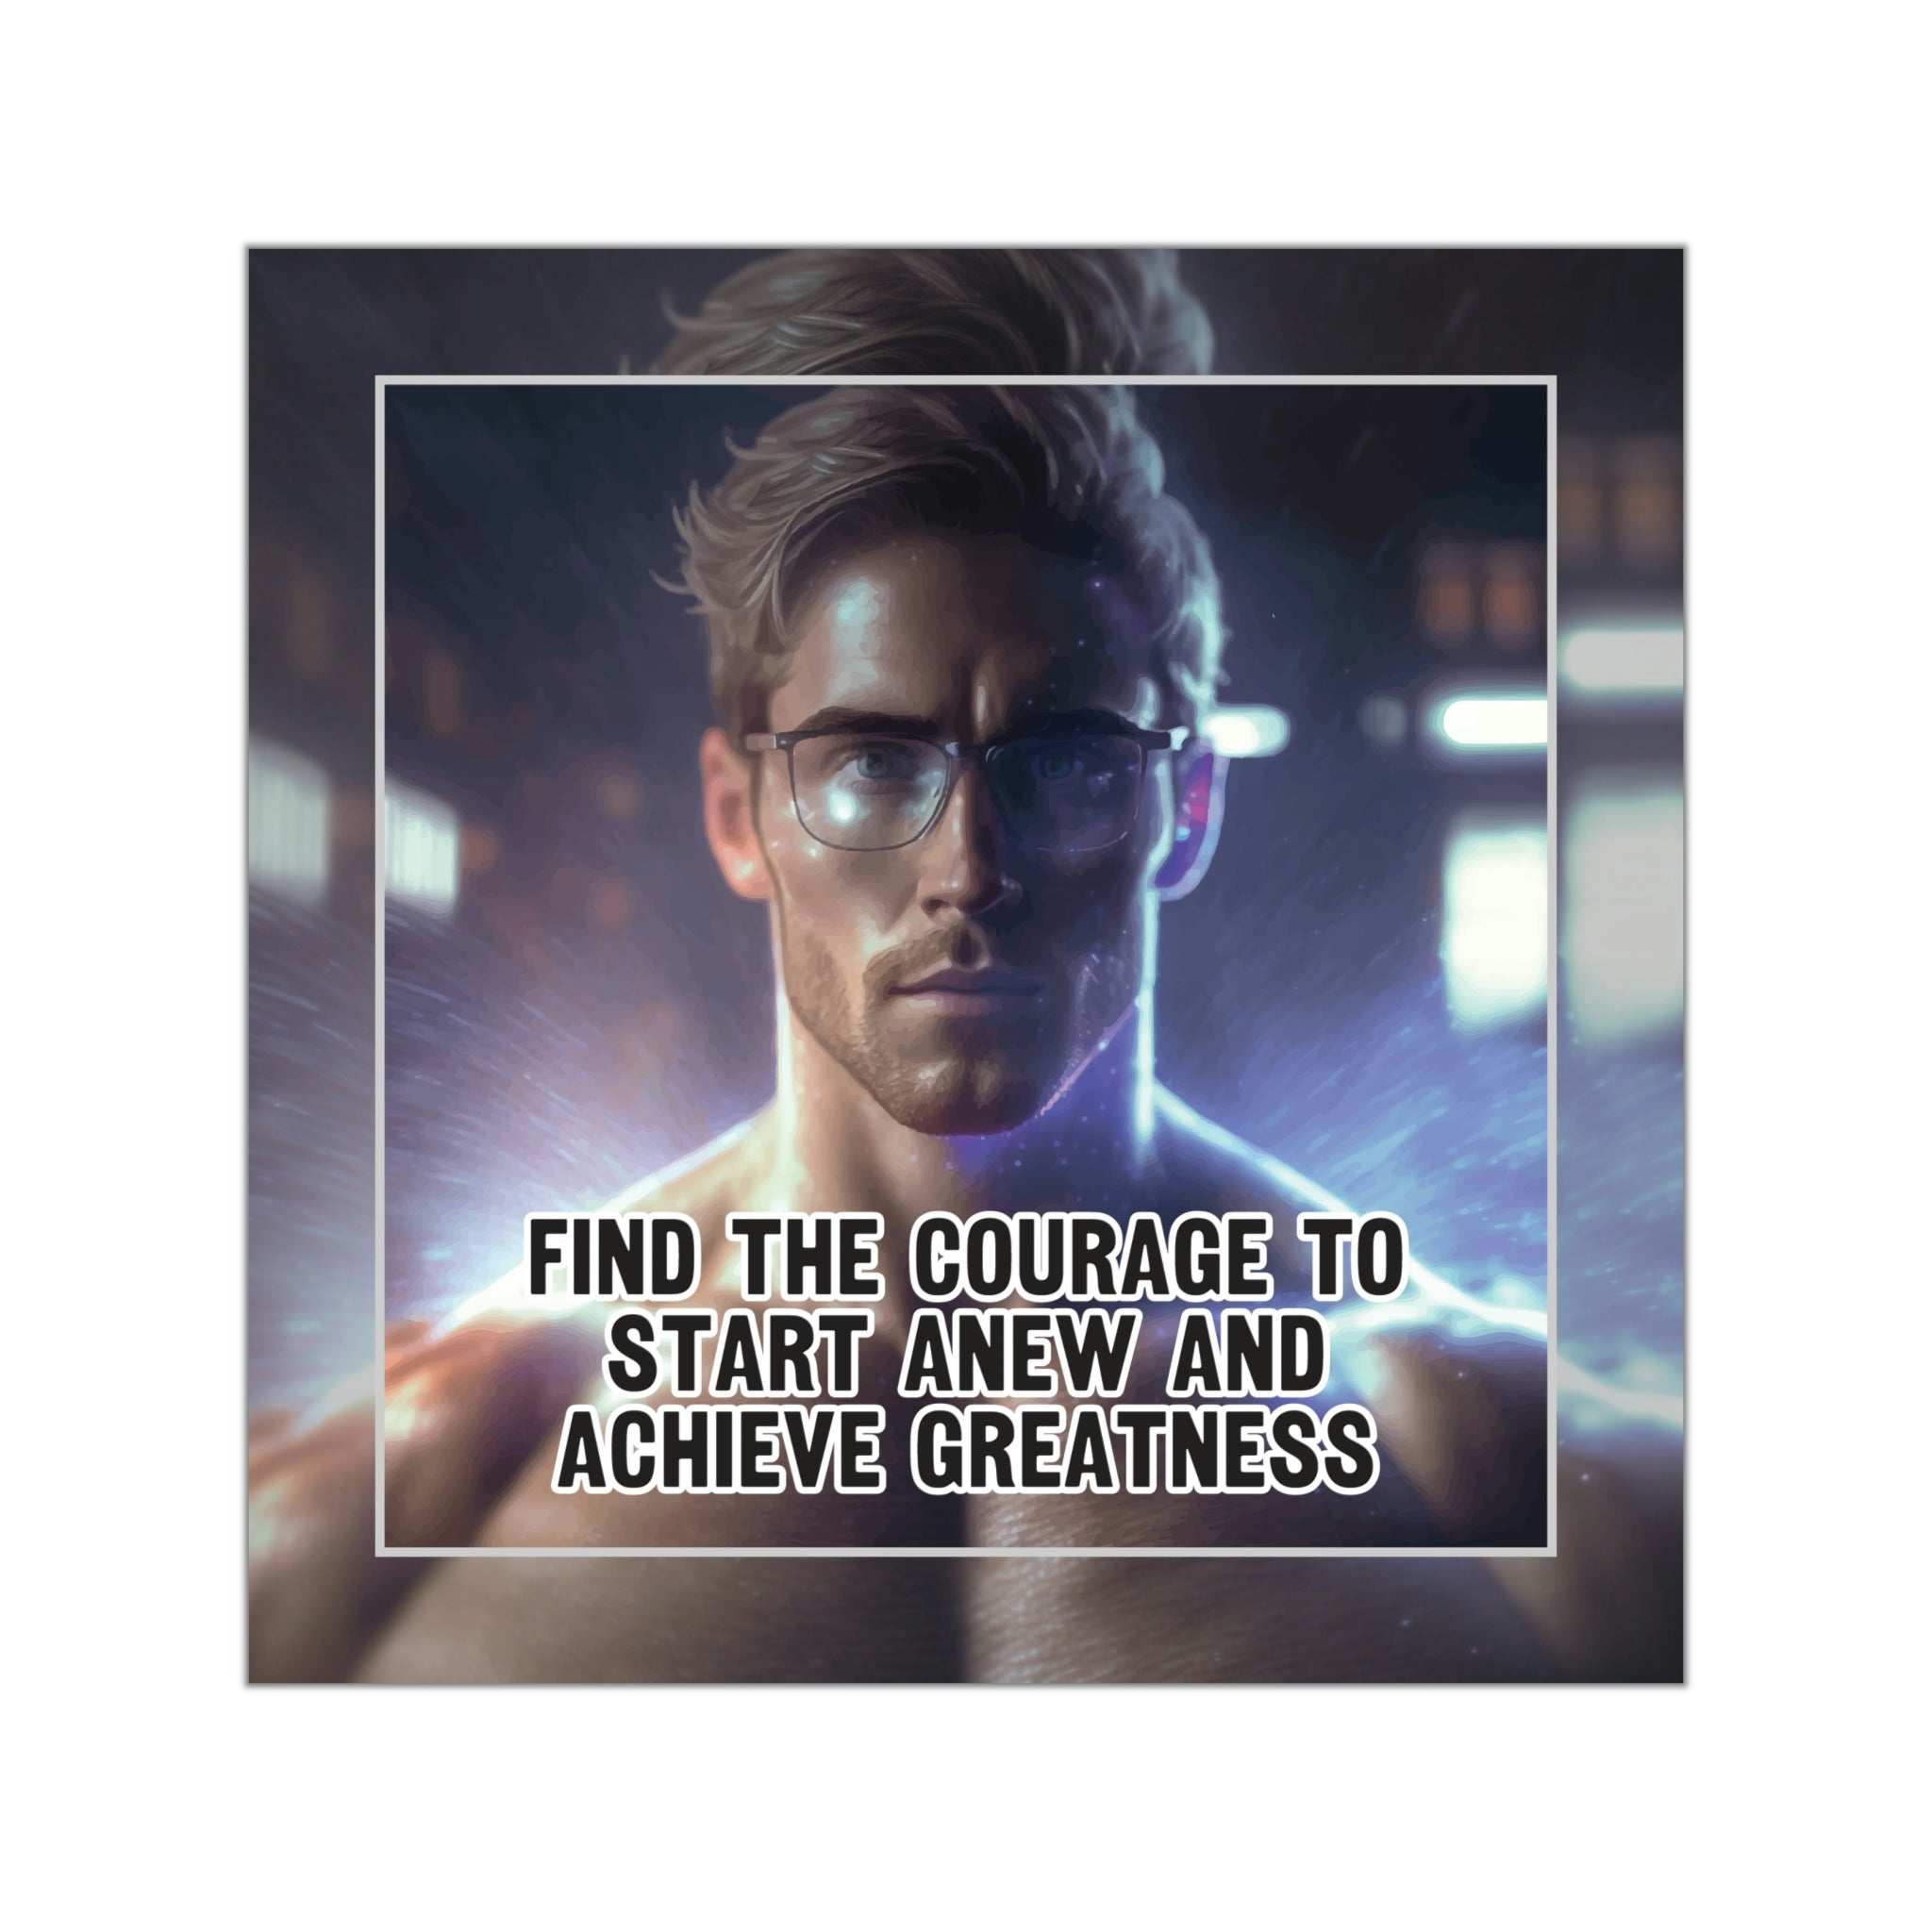 Achieving Greatness Starts with This Inspiring Square Sticker! #size_8x8-inches